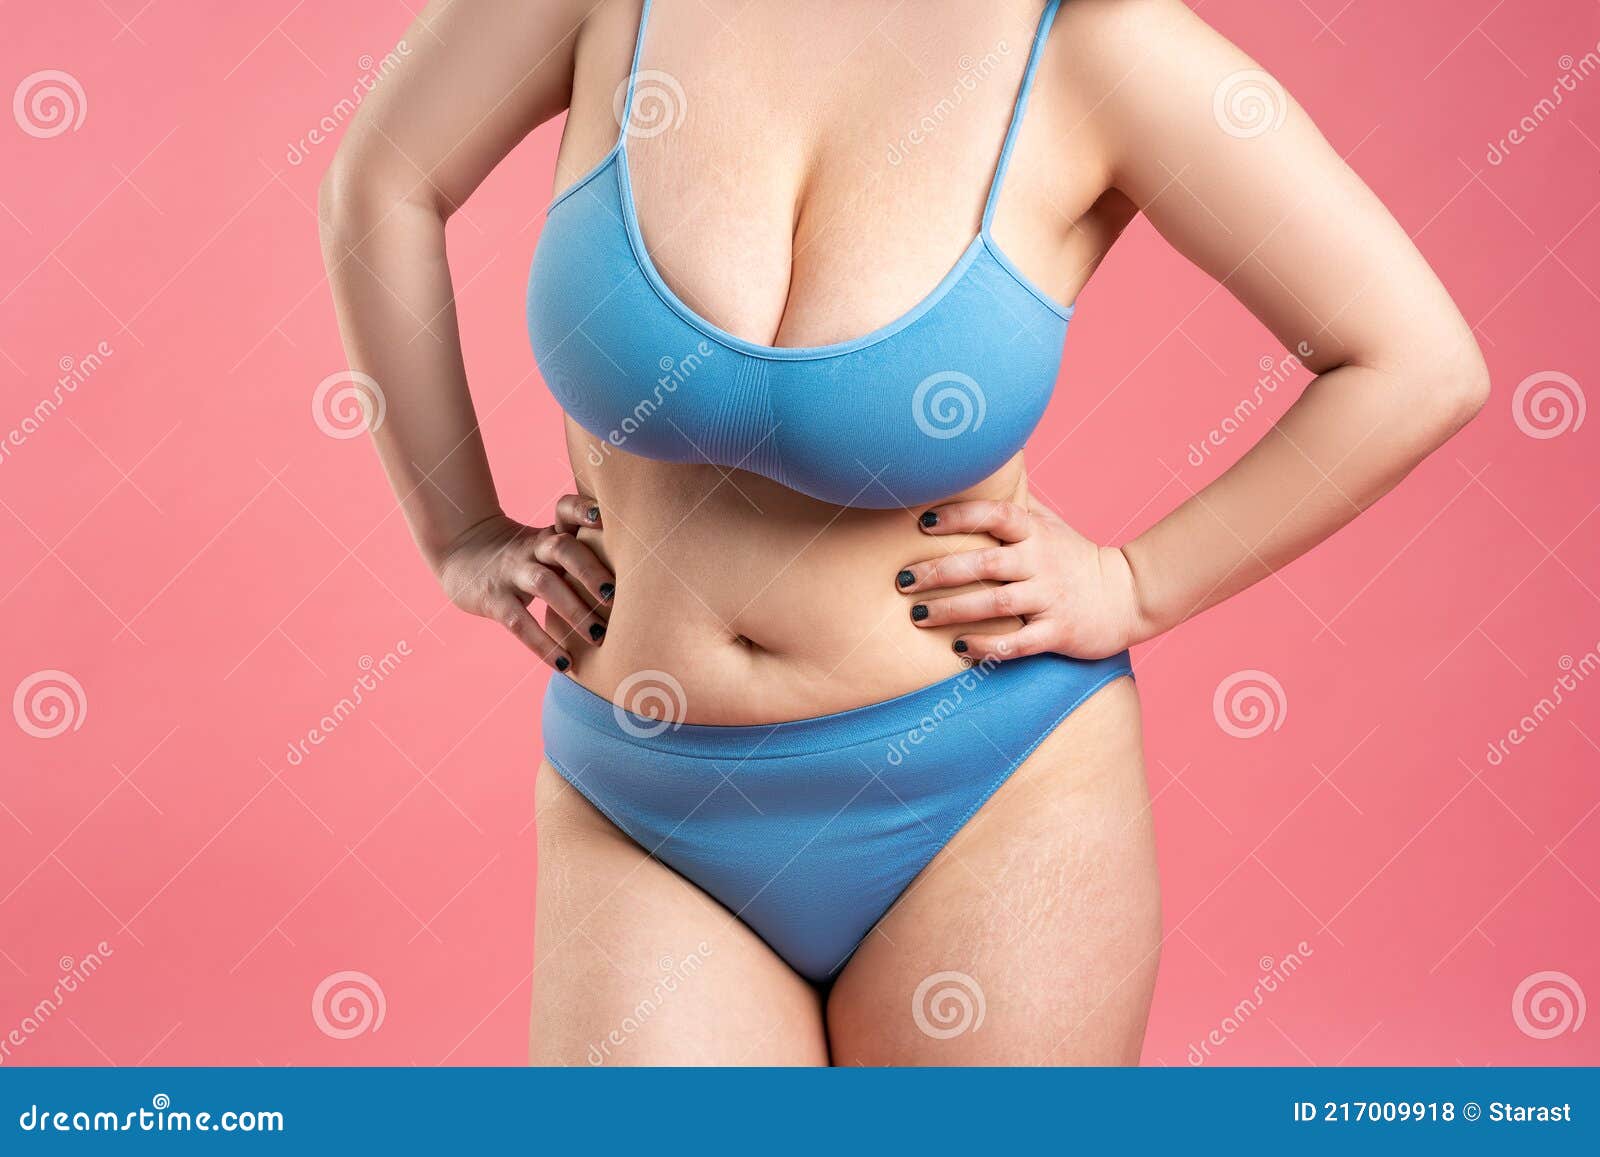 Fat Woman with Very Large Breasts in Blue Underwear on Pink